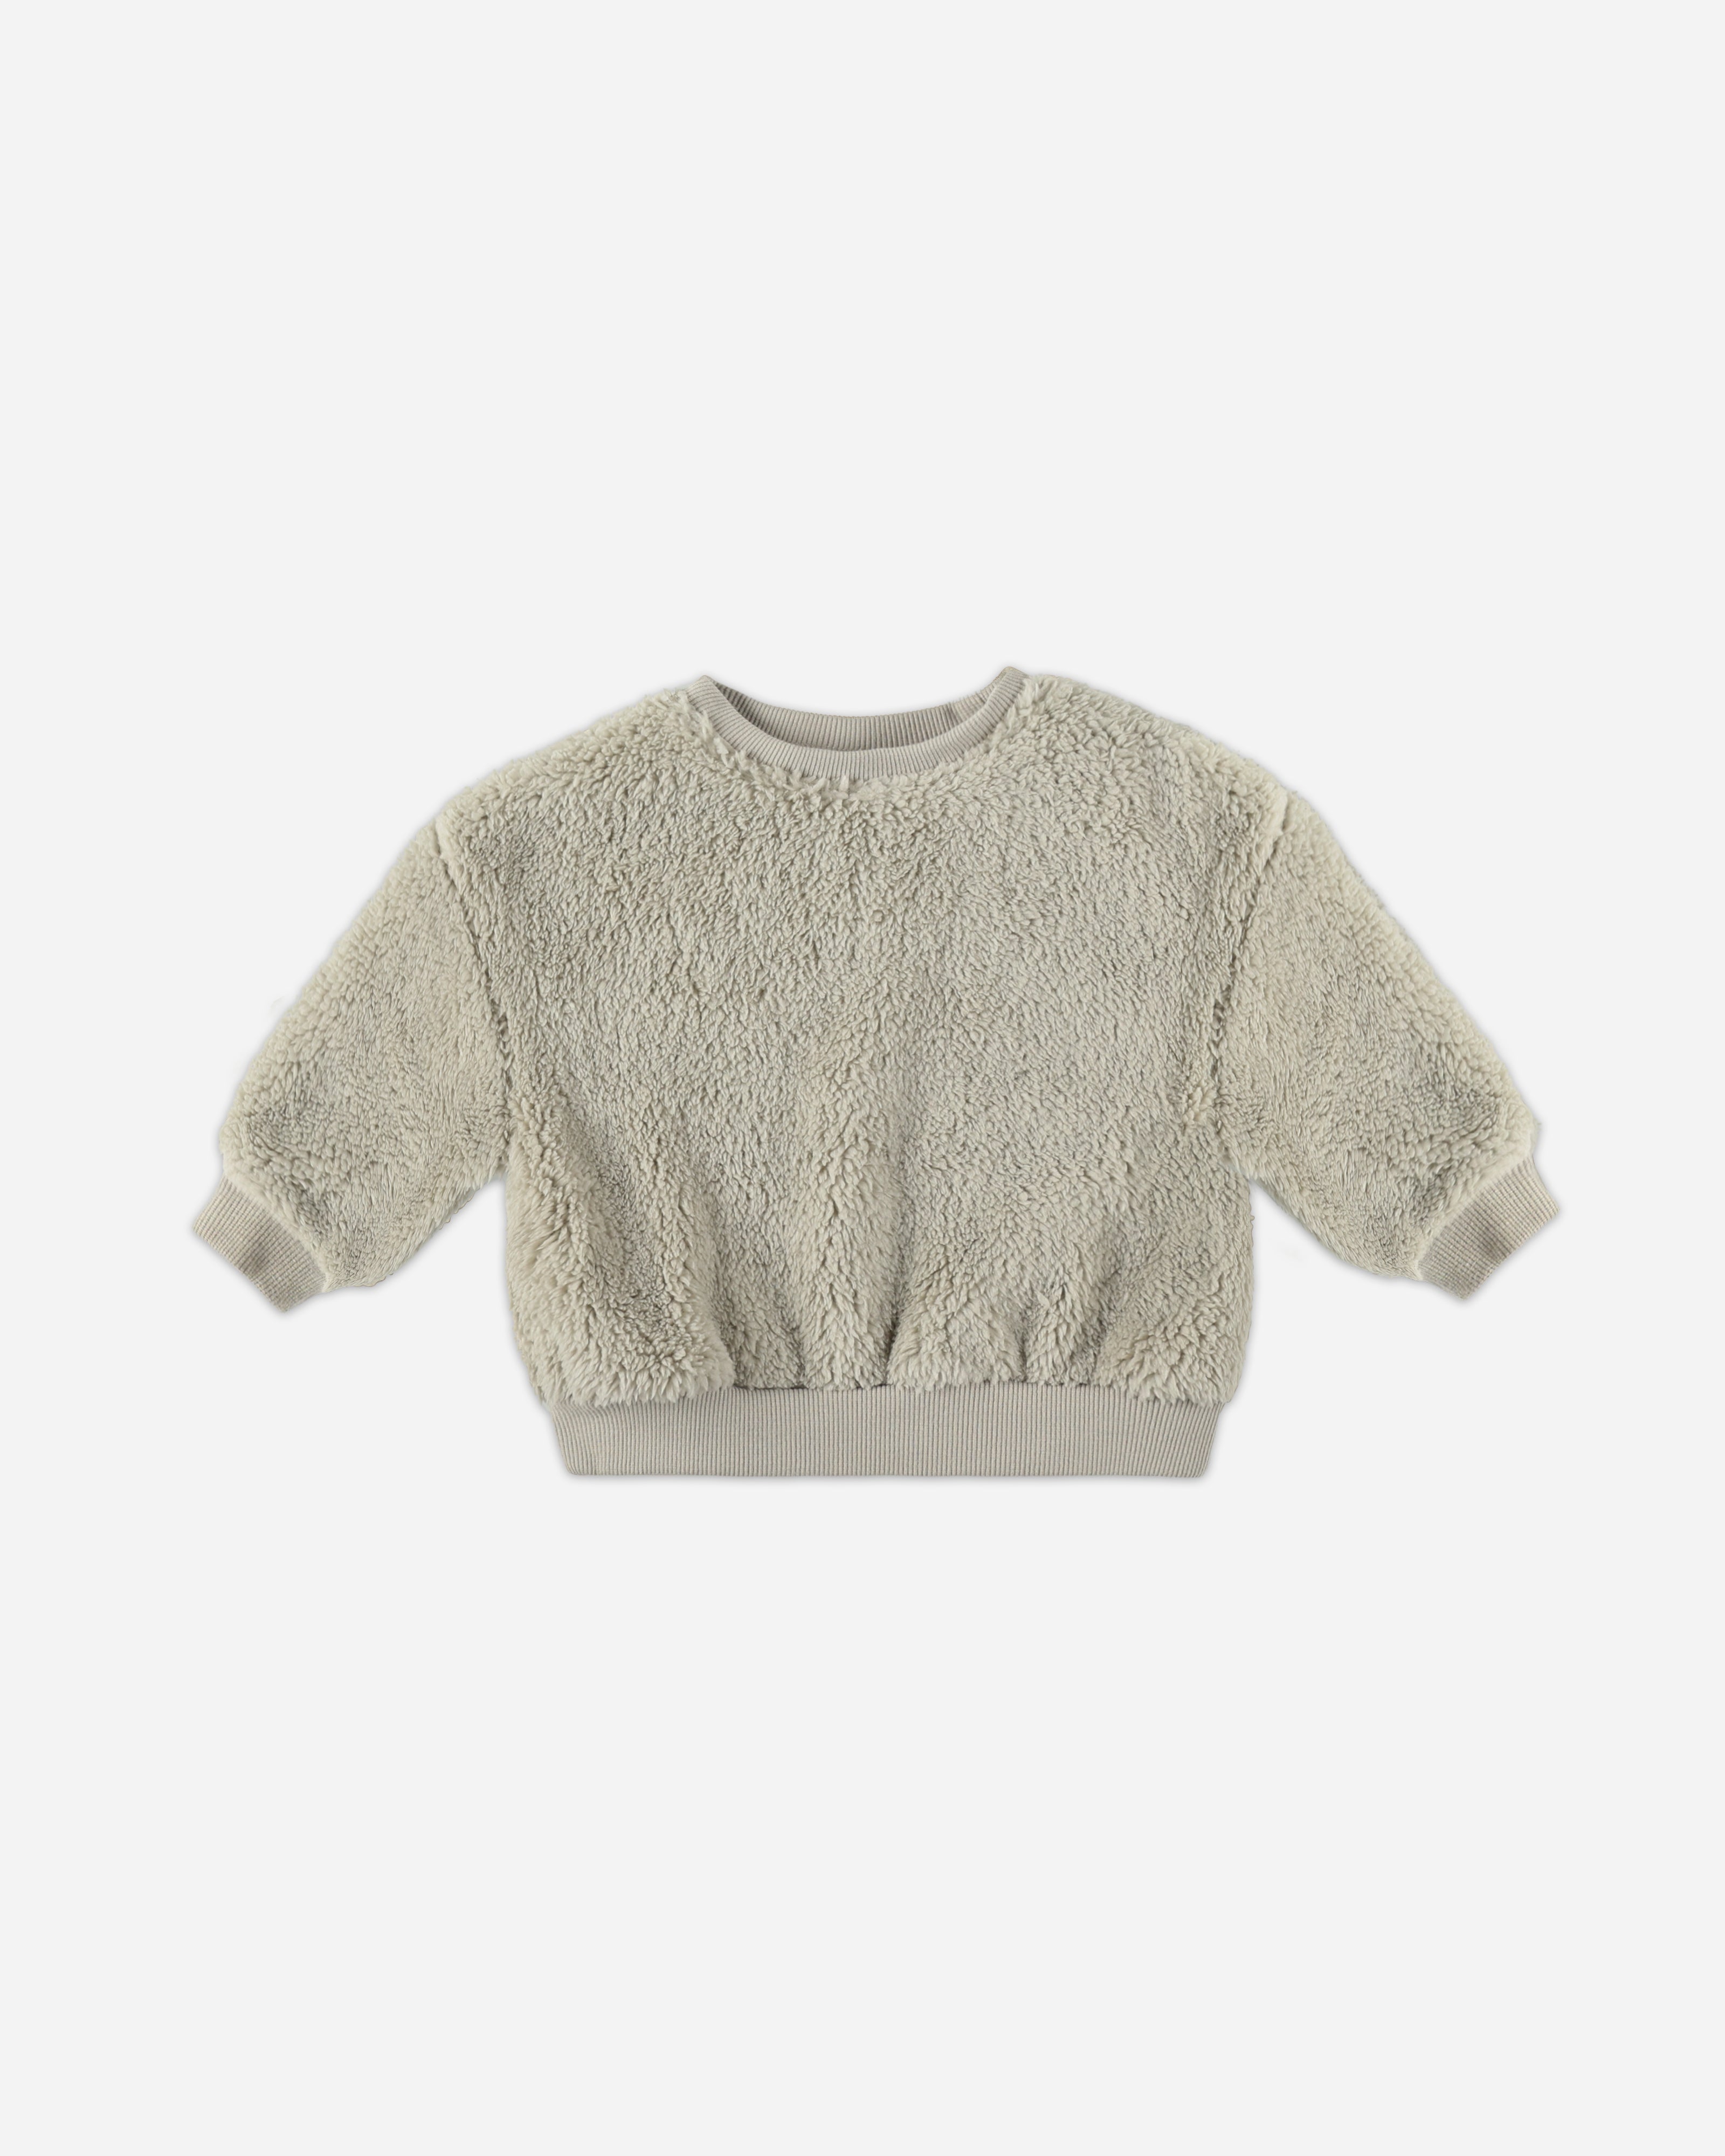 Drop Shoulder Sweatshirt || Pewter - Rylee + Cru | Kids Clothes | Trendy Baby Clothes | Modern Infant Outfits |